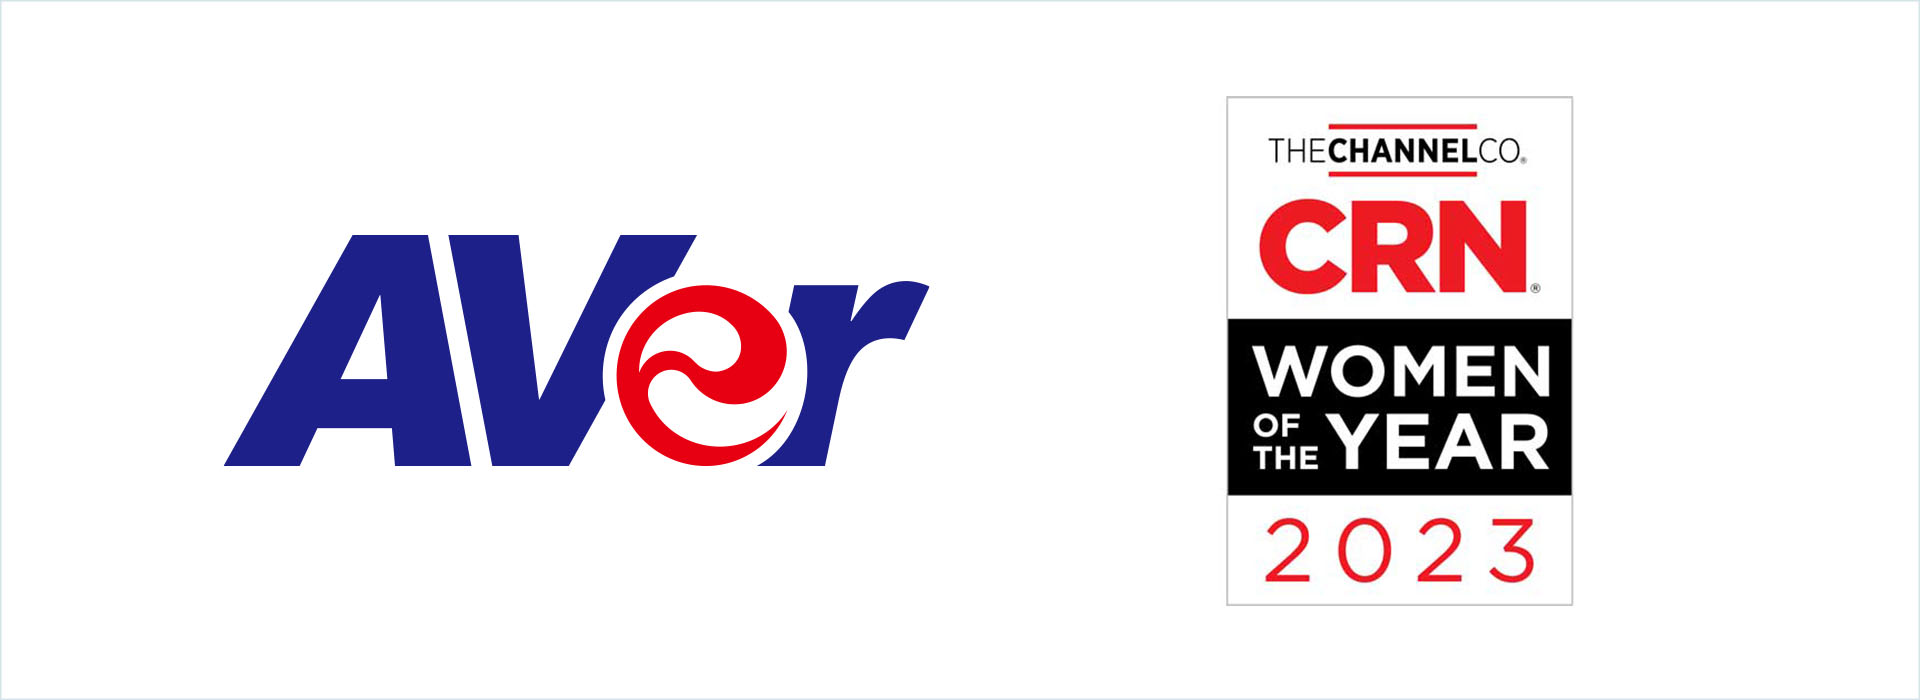 Finalist in the CRN Women of the Year 2023 Awards